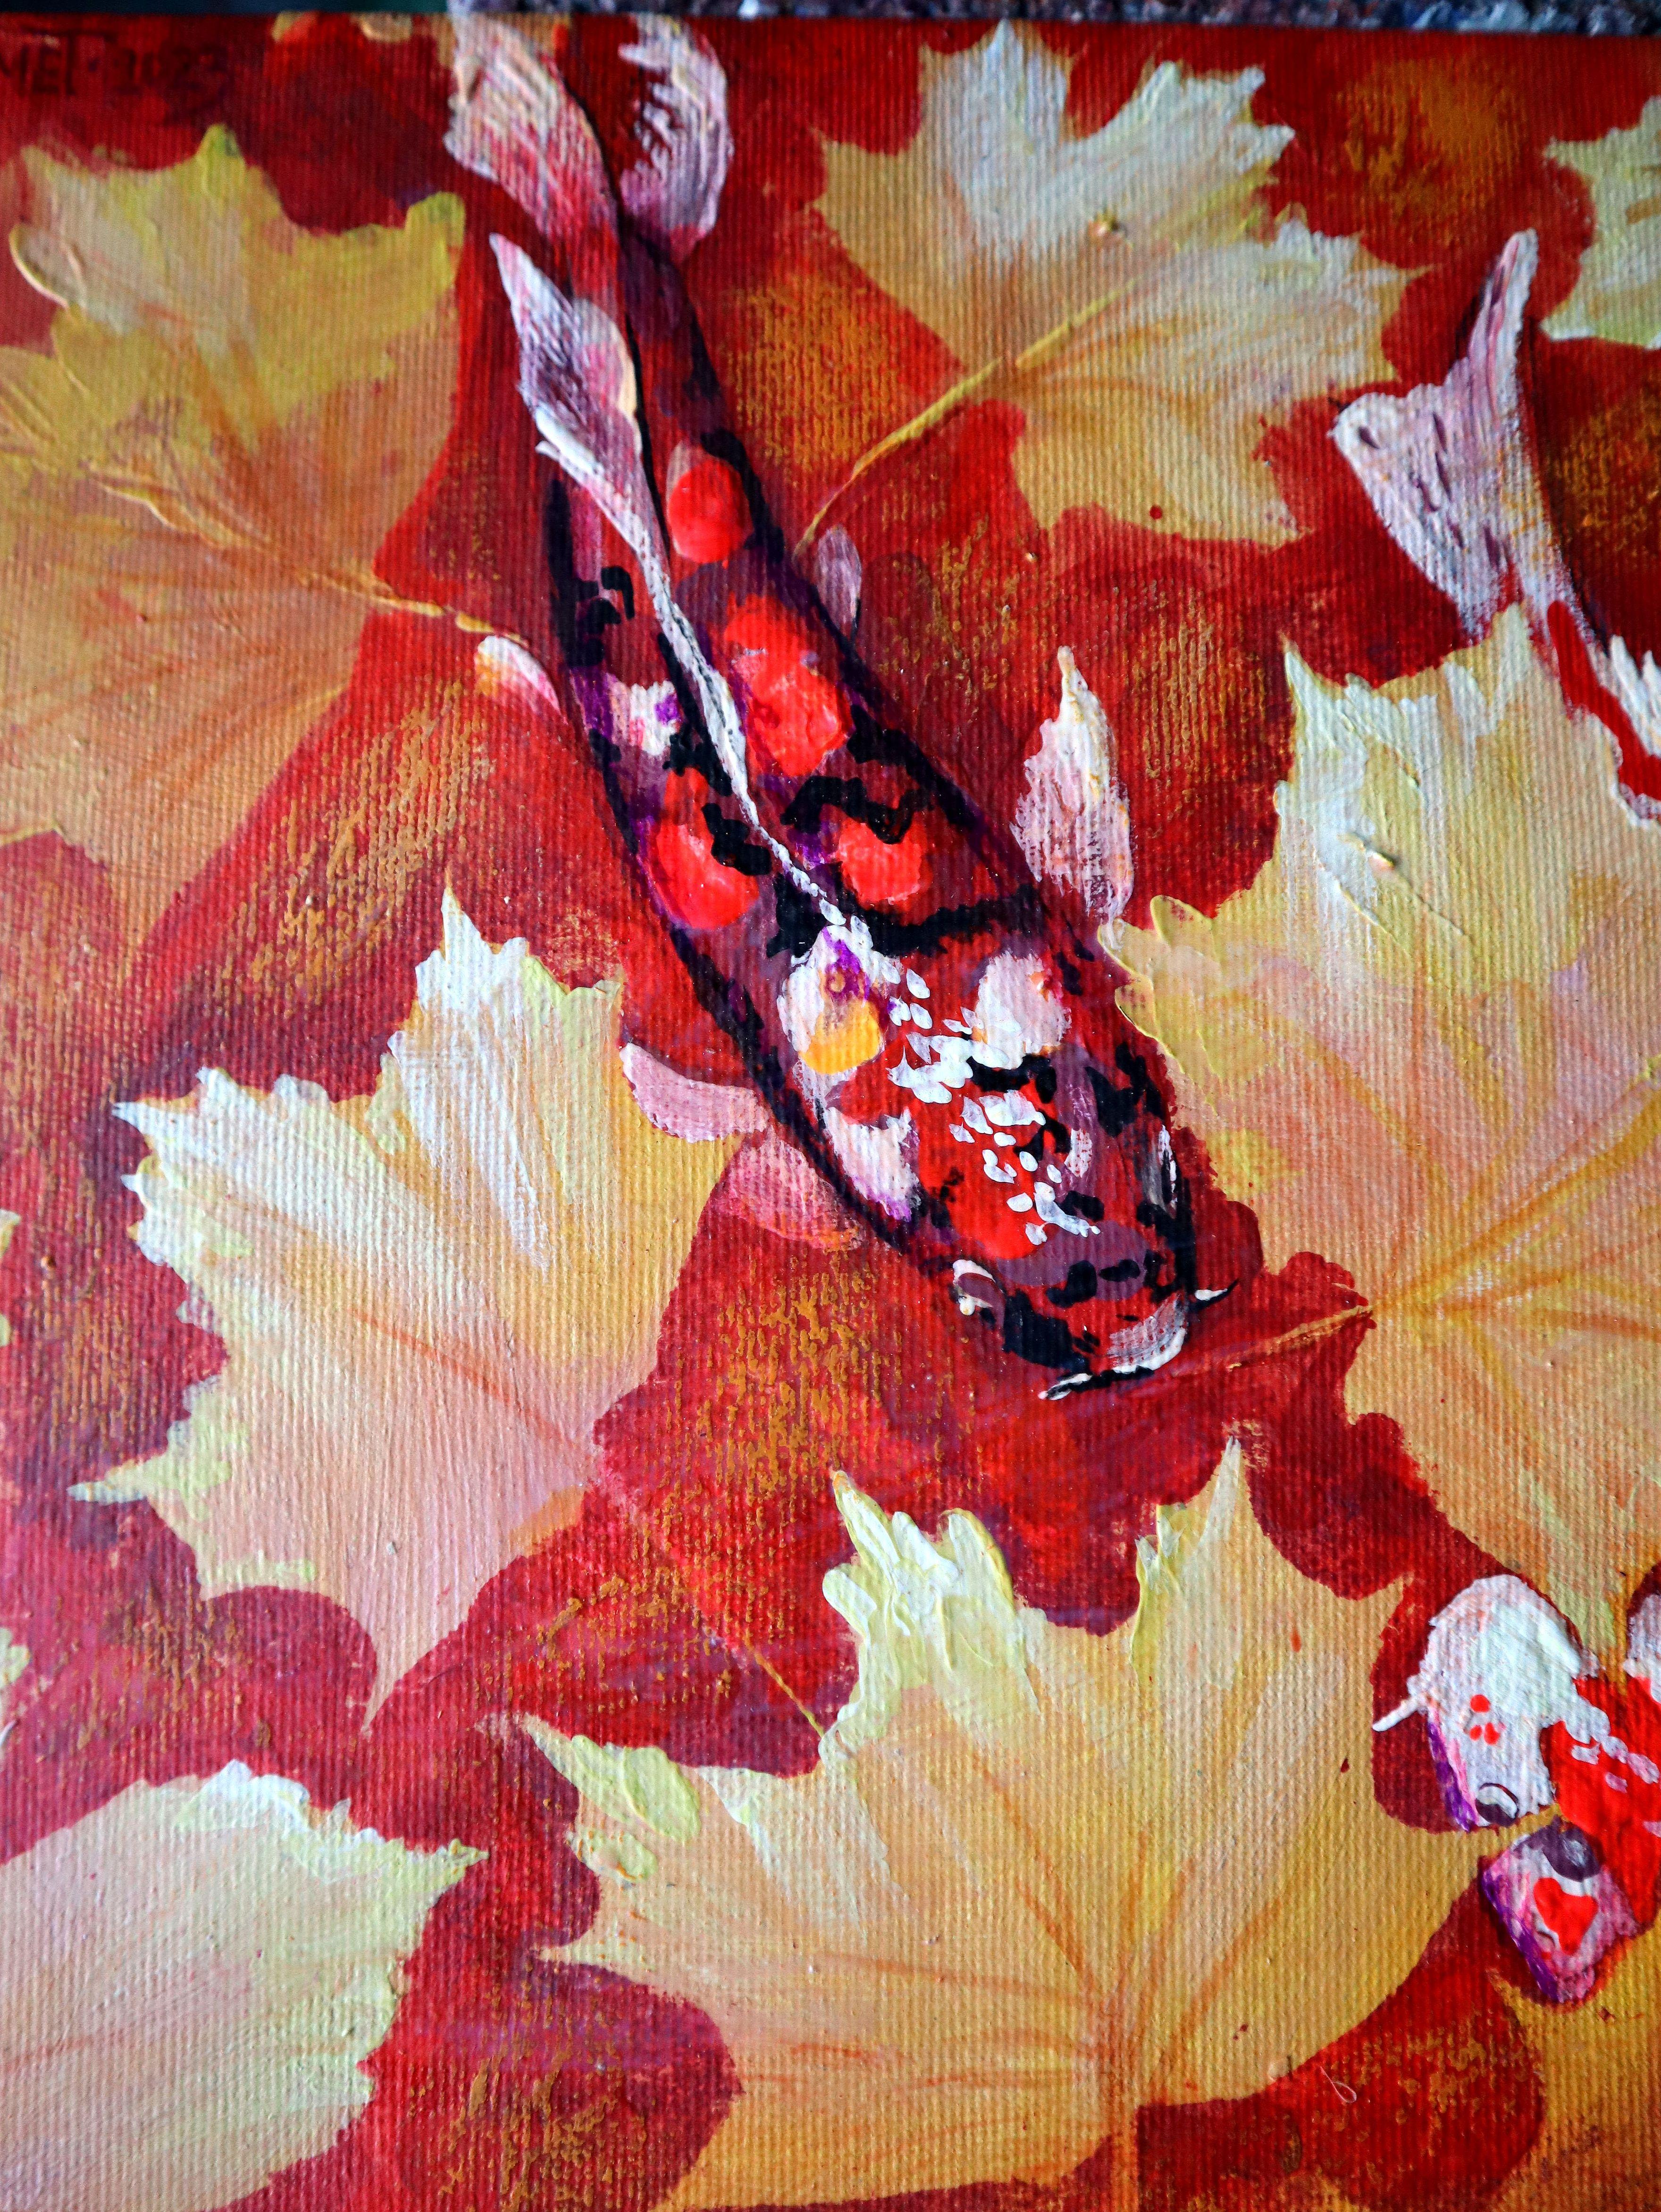 In this vibrant canvas, I merged the fiery tones of autumn leaves with the lively essence of koi fish. I wielded acrylics and oils to blend expressionism, with strokes of impressionism and a touch of pop art surrealism, capturing the ephemeral